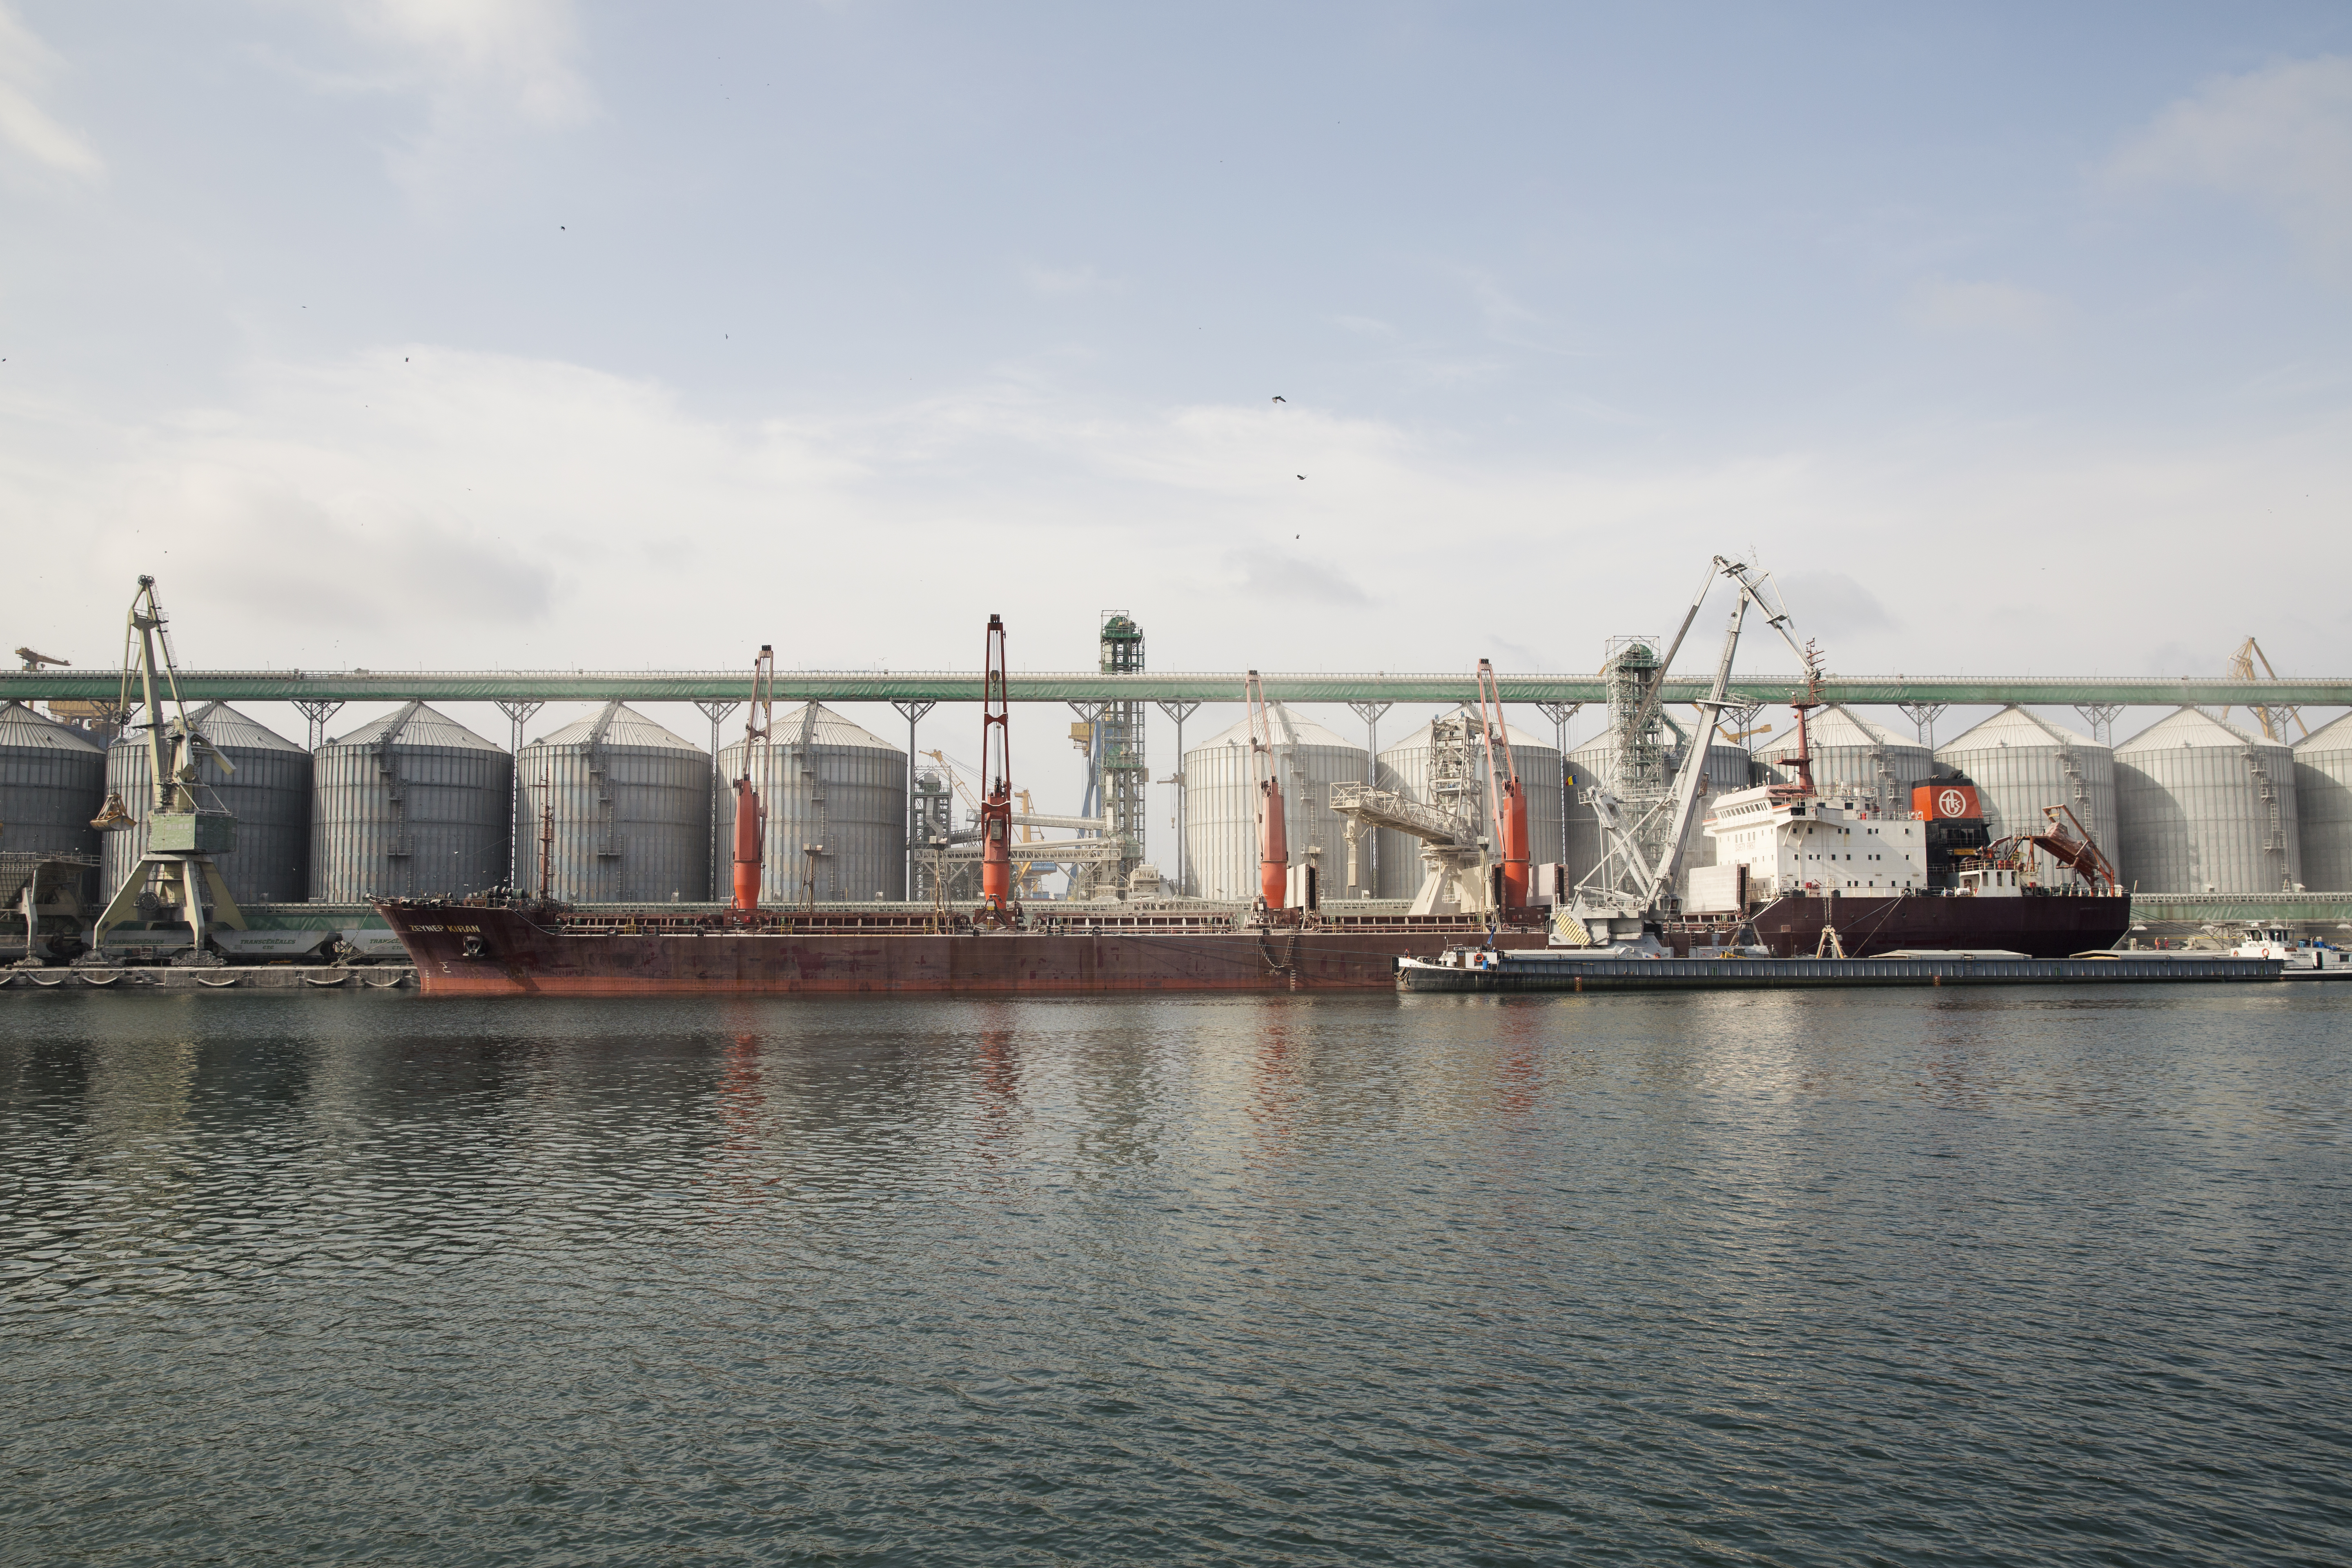 The company is a leading agribusiness in the region, with a presence in Romania, Serbia, Slovakia, Croatia, Bulgaria, Hungary, and Moldova. The Black Sea port of Constanta is the beating heart of the operation. COFCO International owns a terminal here with a capacity of 260 kmt that rolls out an elevation program of almost 4 million mt per year.